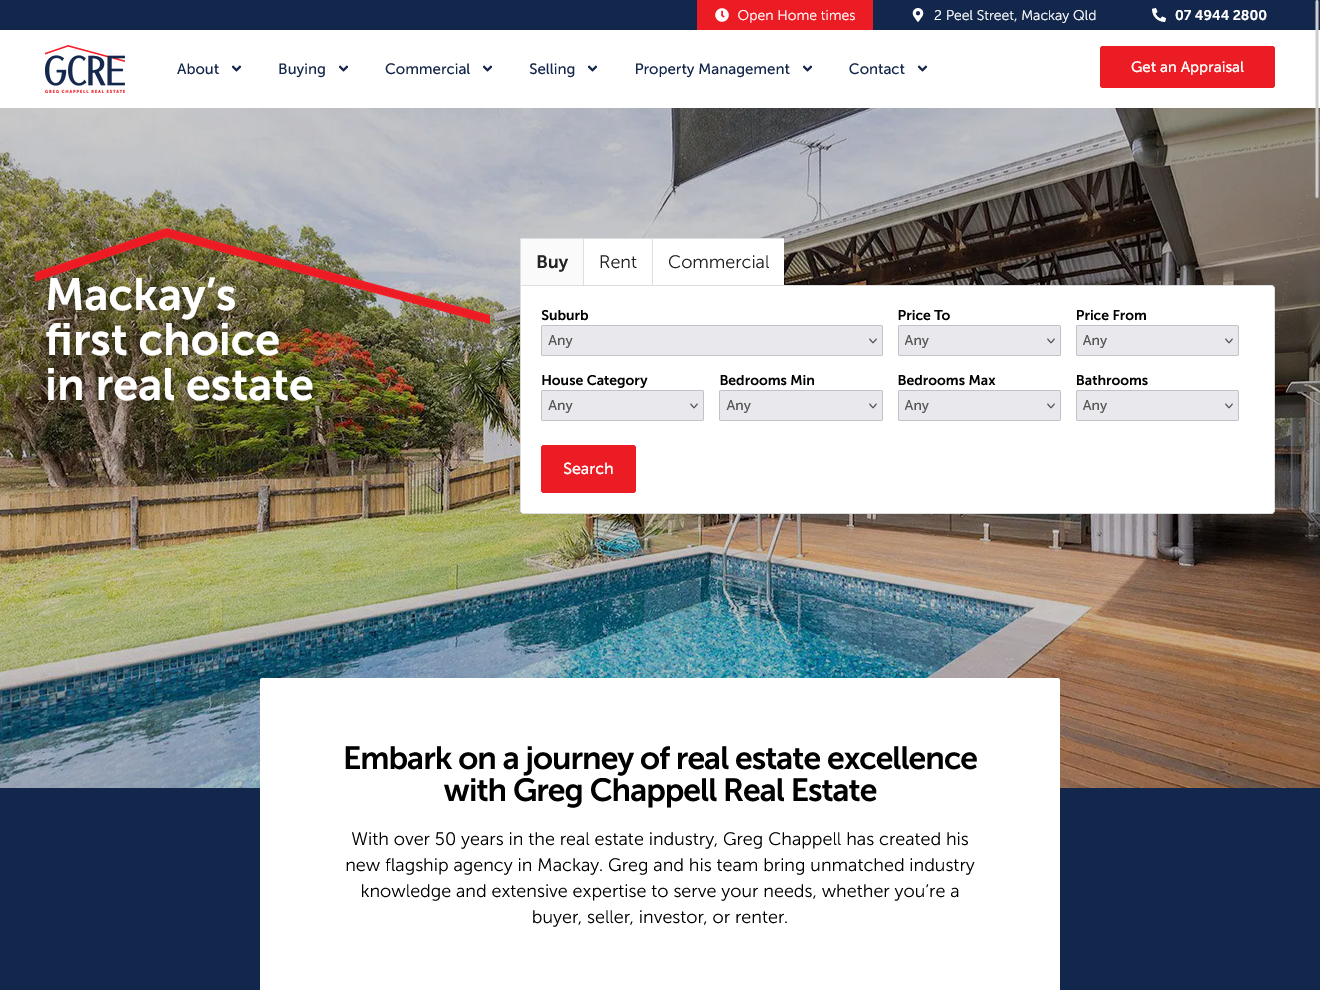 Greg Chappell Real Estate home page